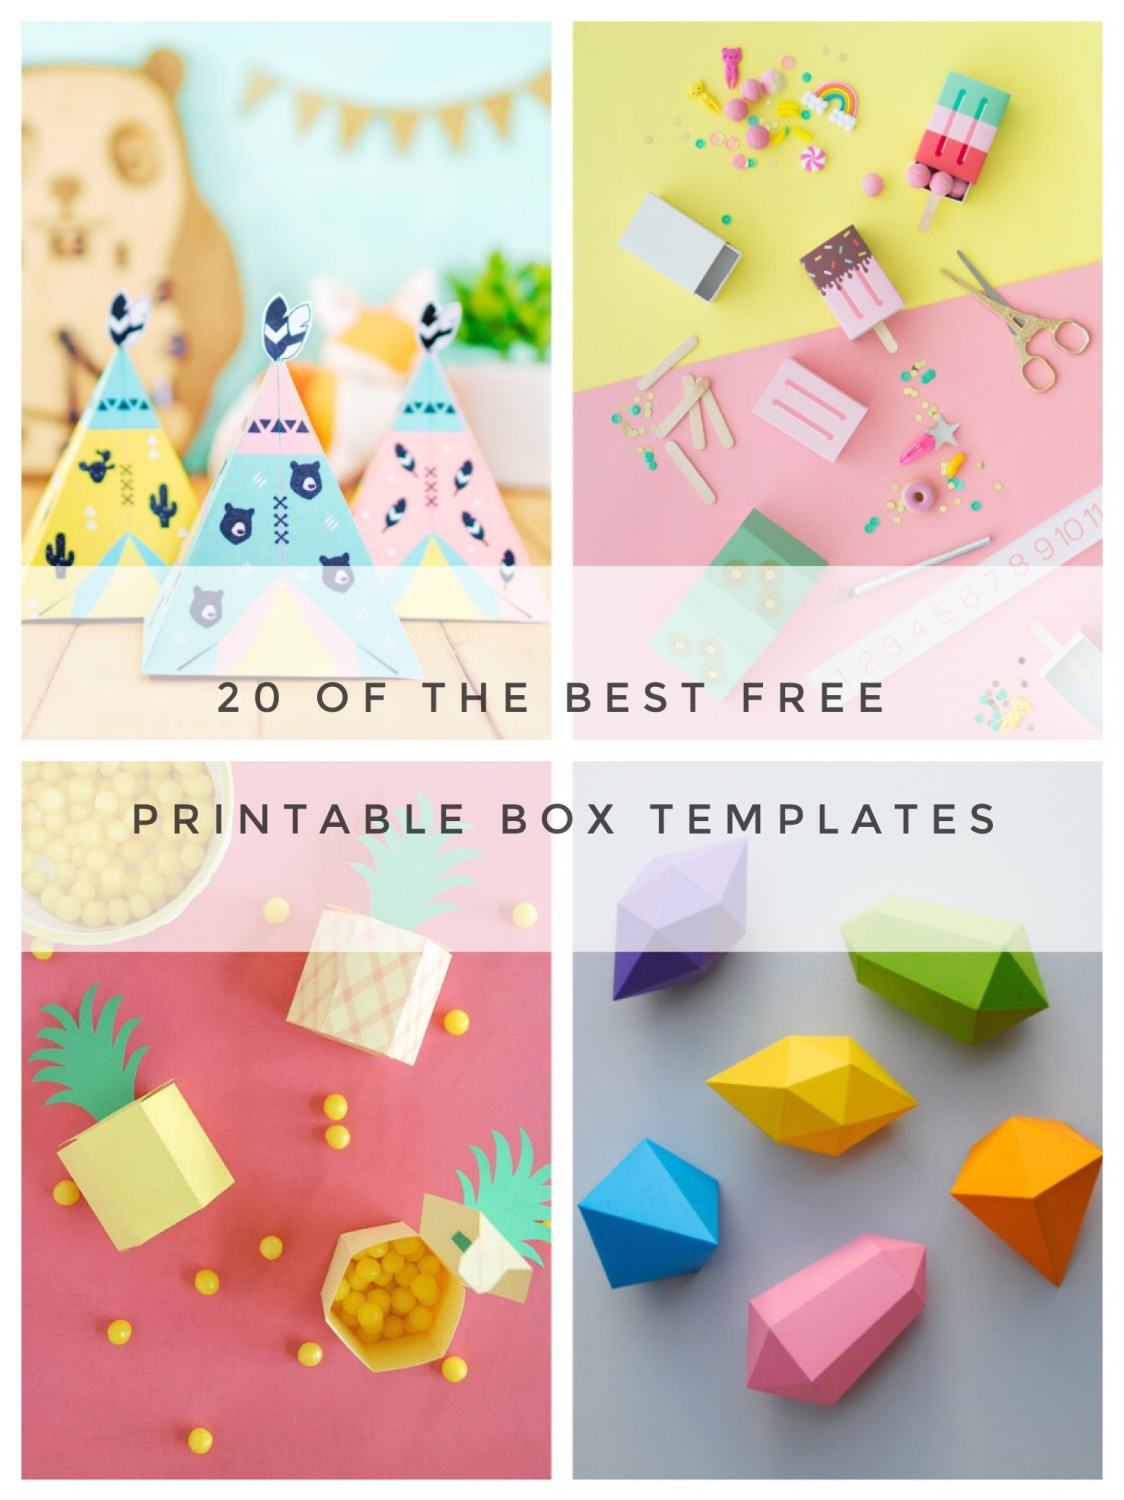 20 Of The Best Free Printable Box Templates within Box Templates Free Printable